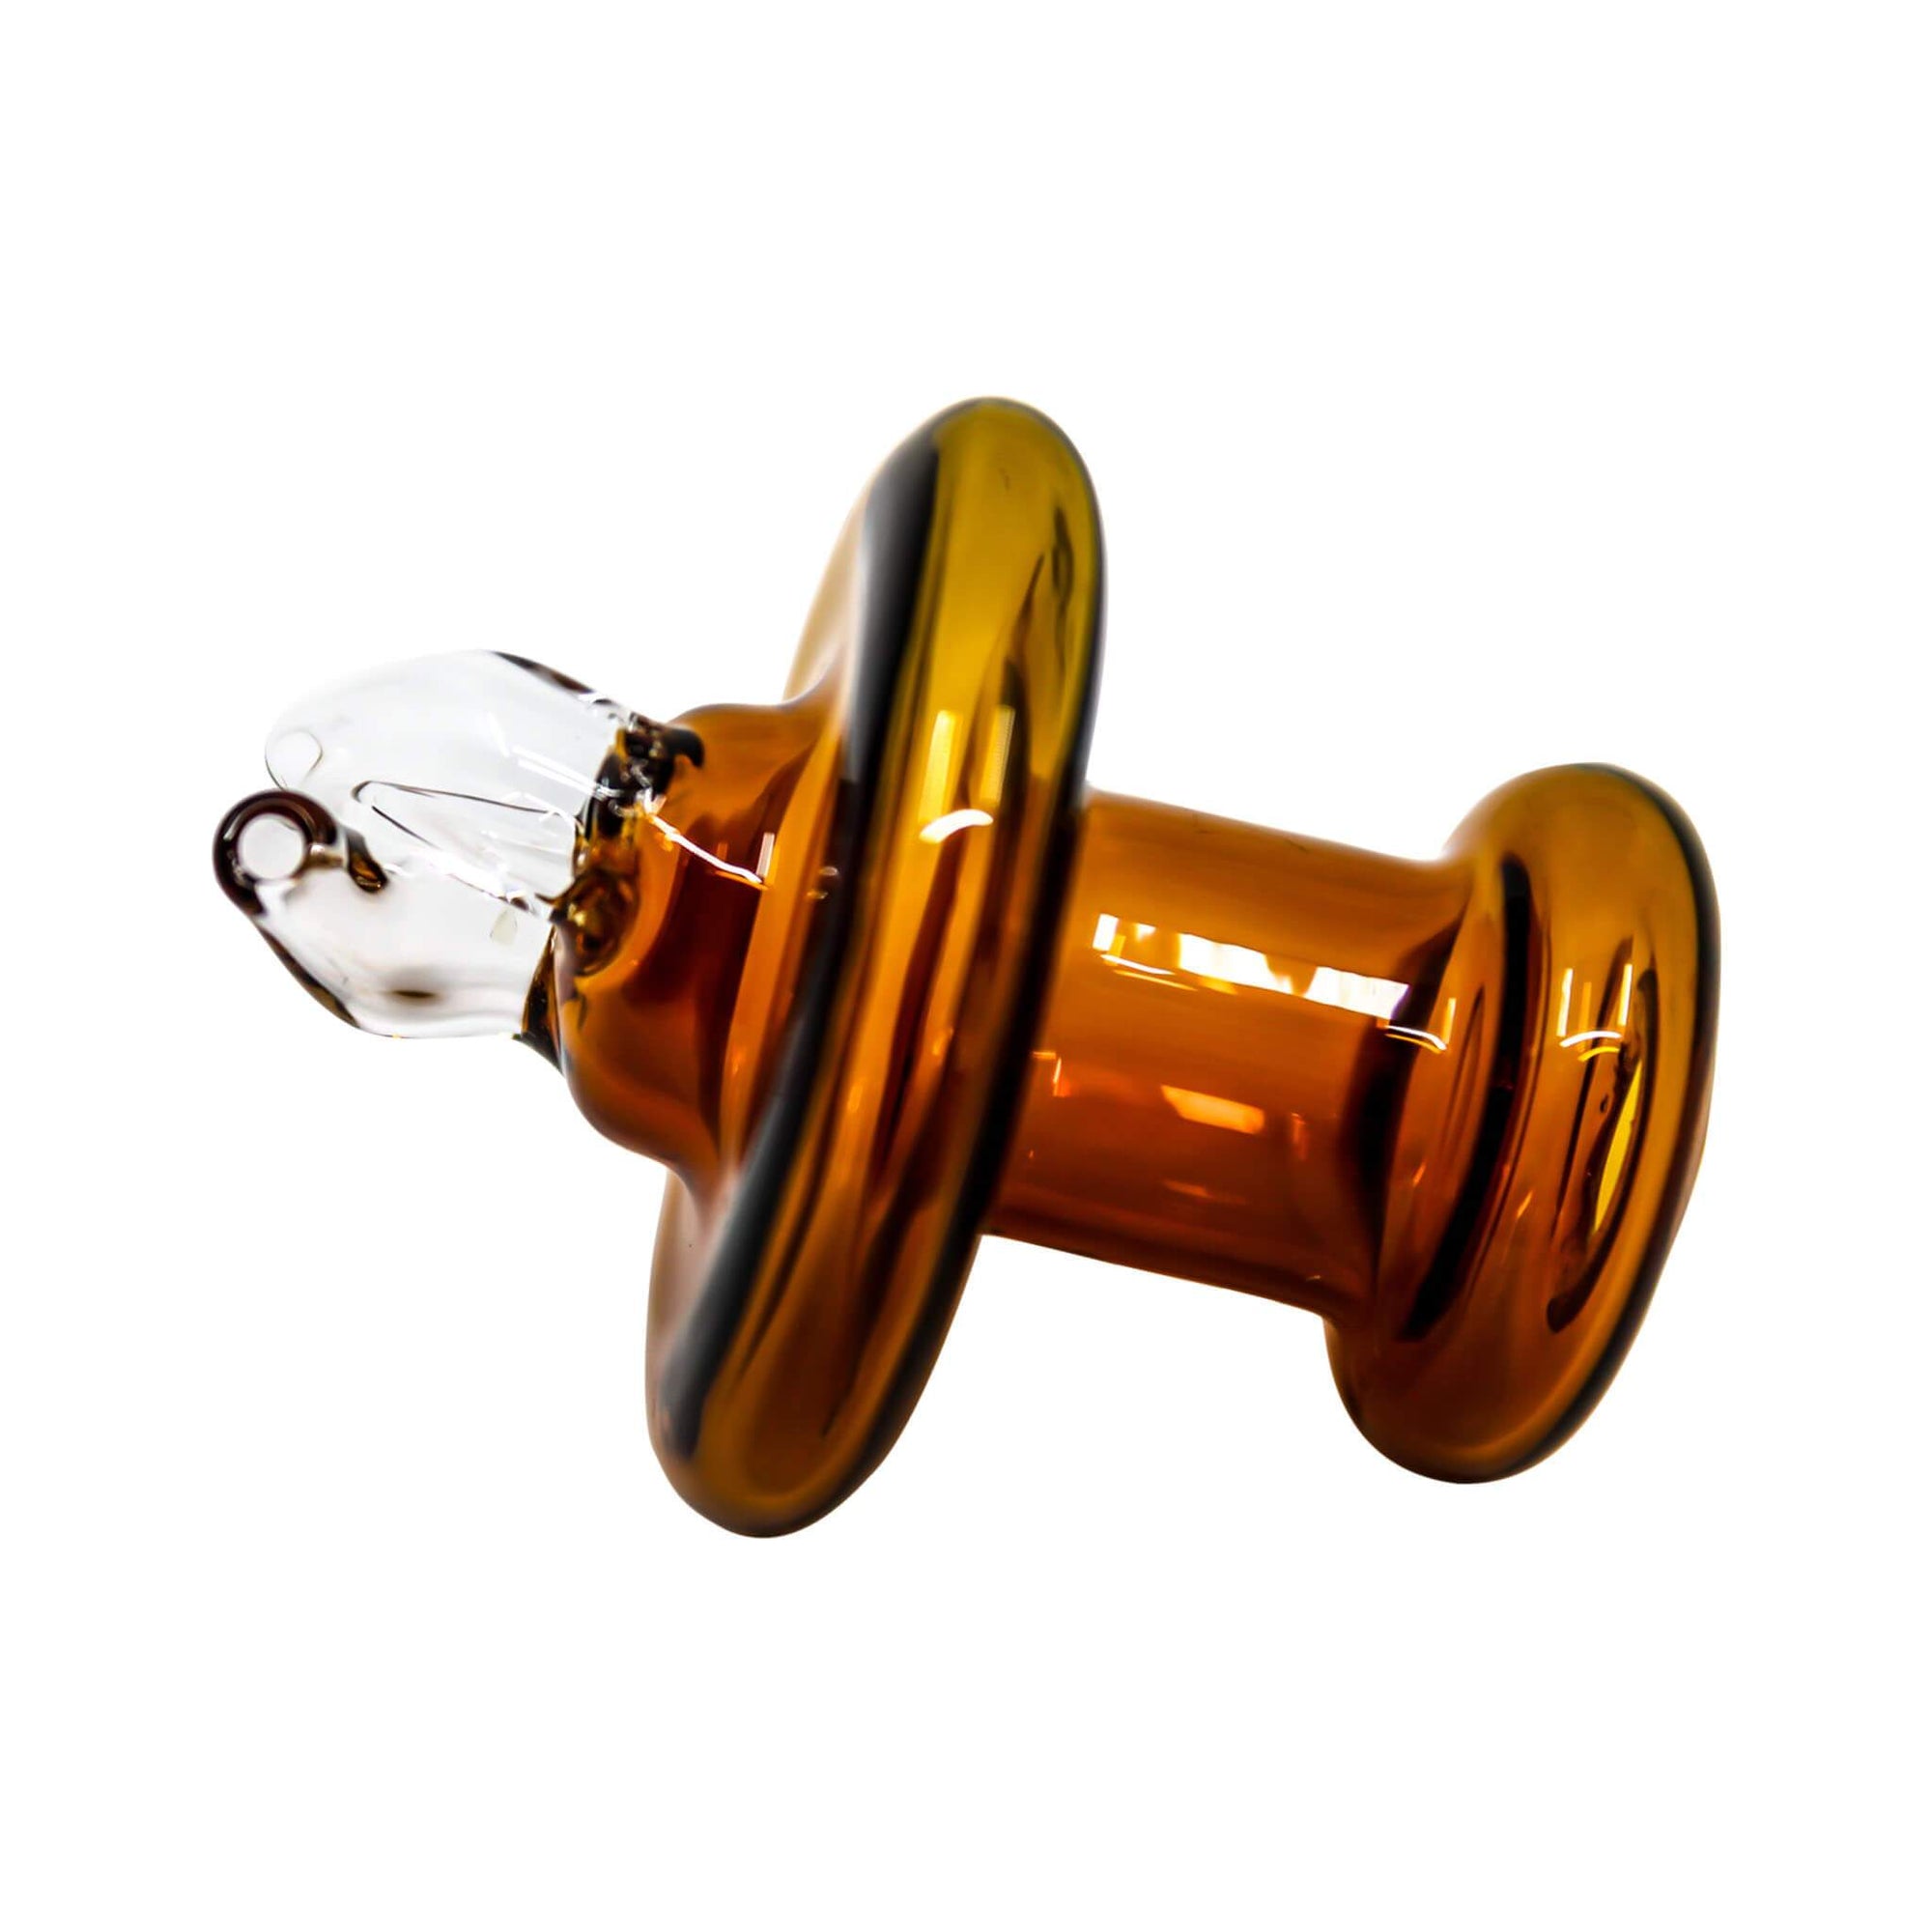 Dual Nozzle Directional Pushpin Carb Cap | Amber Angled View | the dabbing specialists